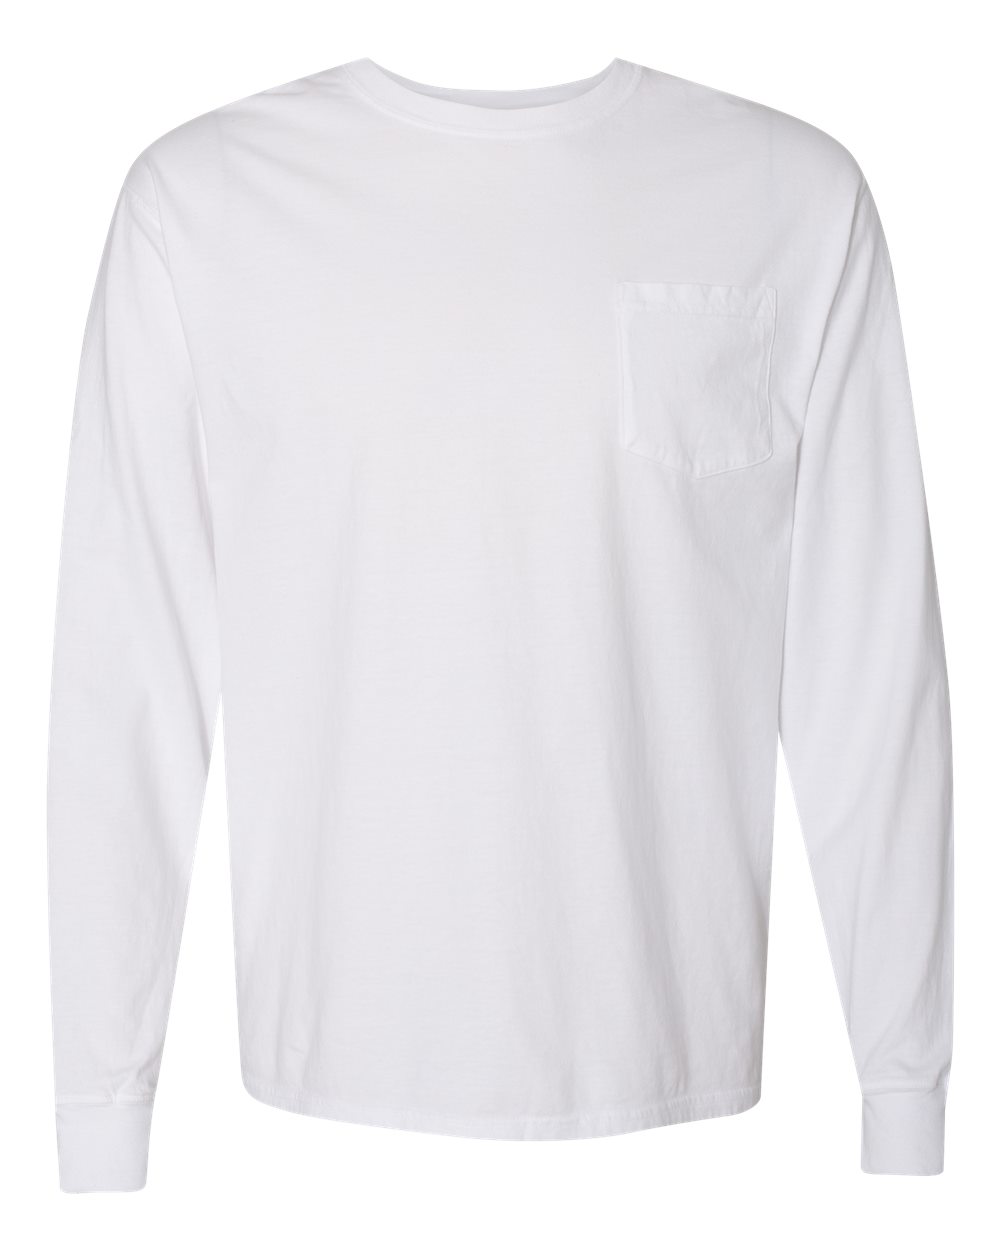 Garment Dyed Long Sleeve T-Shirt With a Pocket-ComfortWash by Hanes